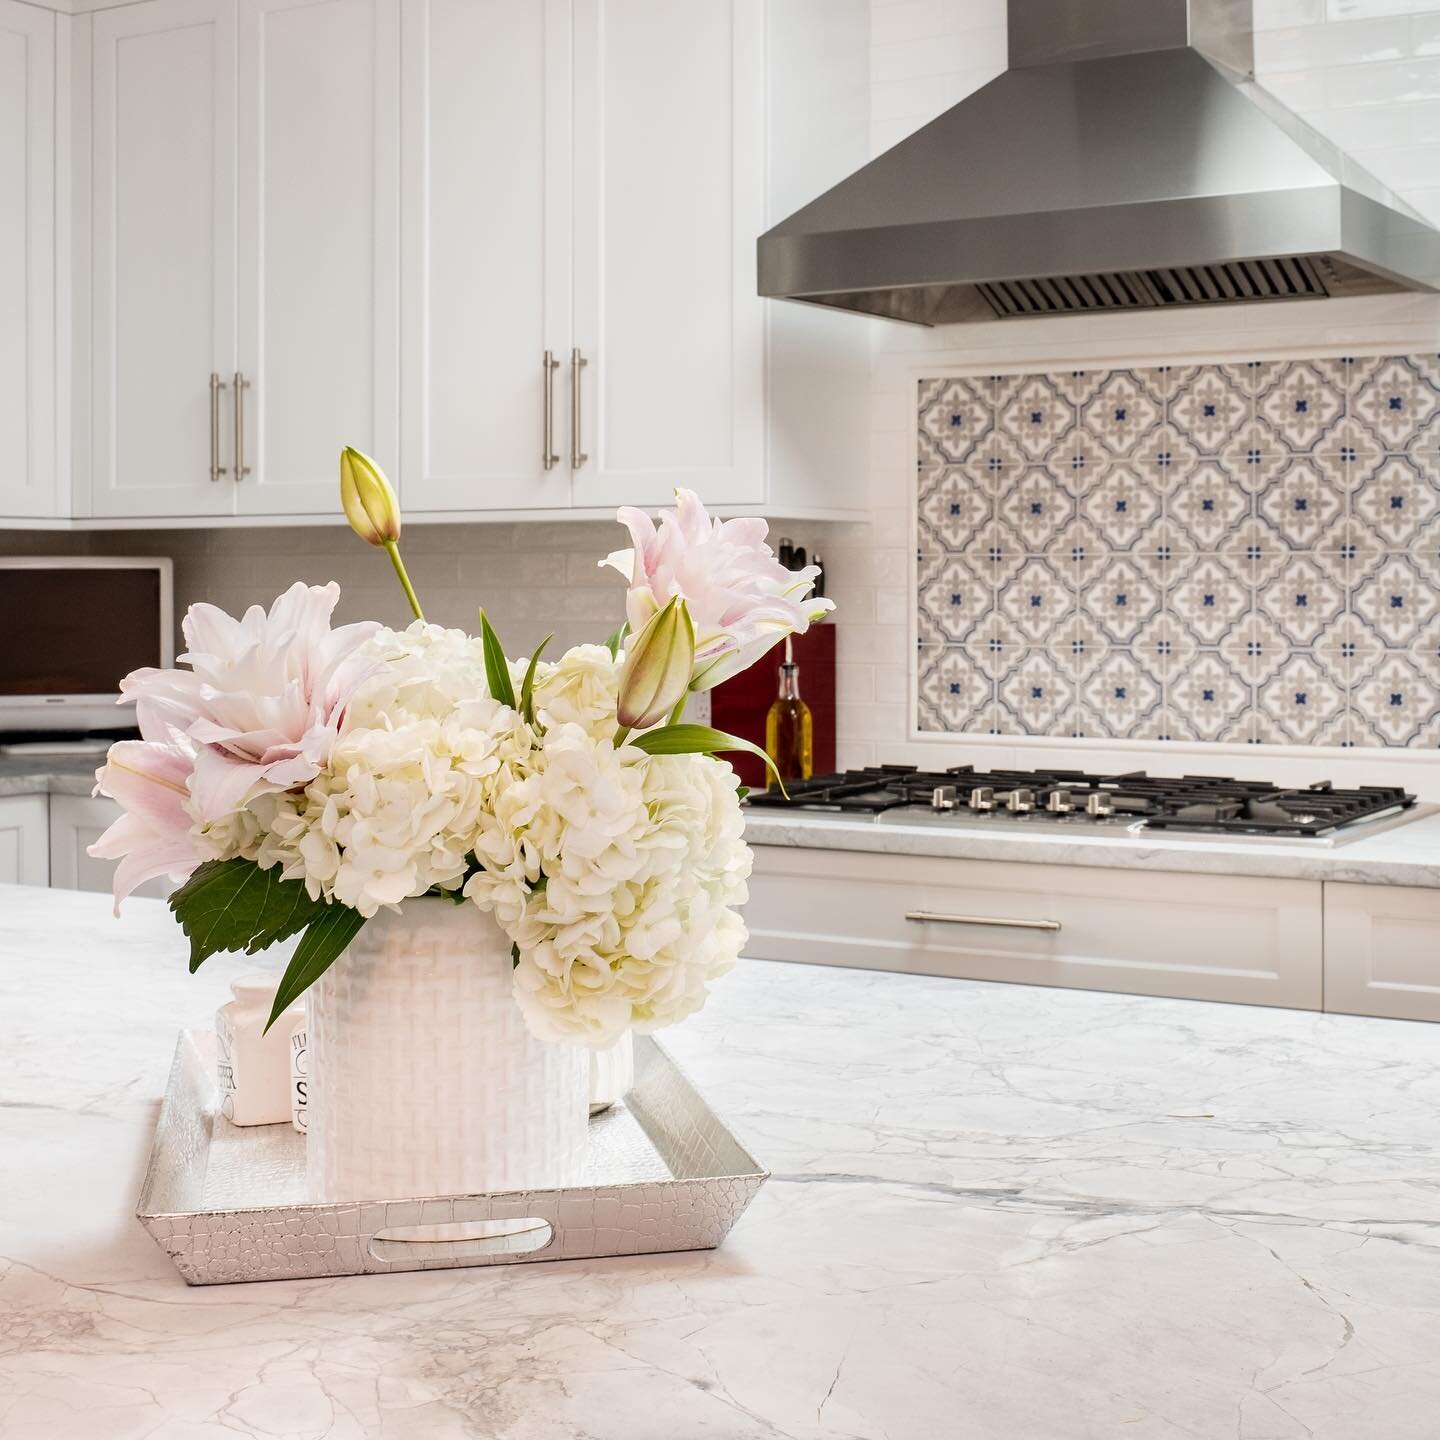 Happy Mother&rsquo;s Day from the KTM Team!  We definitely recommend giving flowers...to go with her new kitchen ! #mothersday #mothersdaygift #kitchendesign #makemomhappy #architect #larchmont #larchmontmoms #westchestercounty #kitchenremodel #beaut